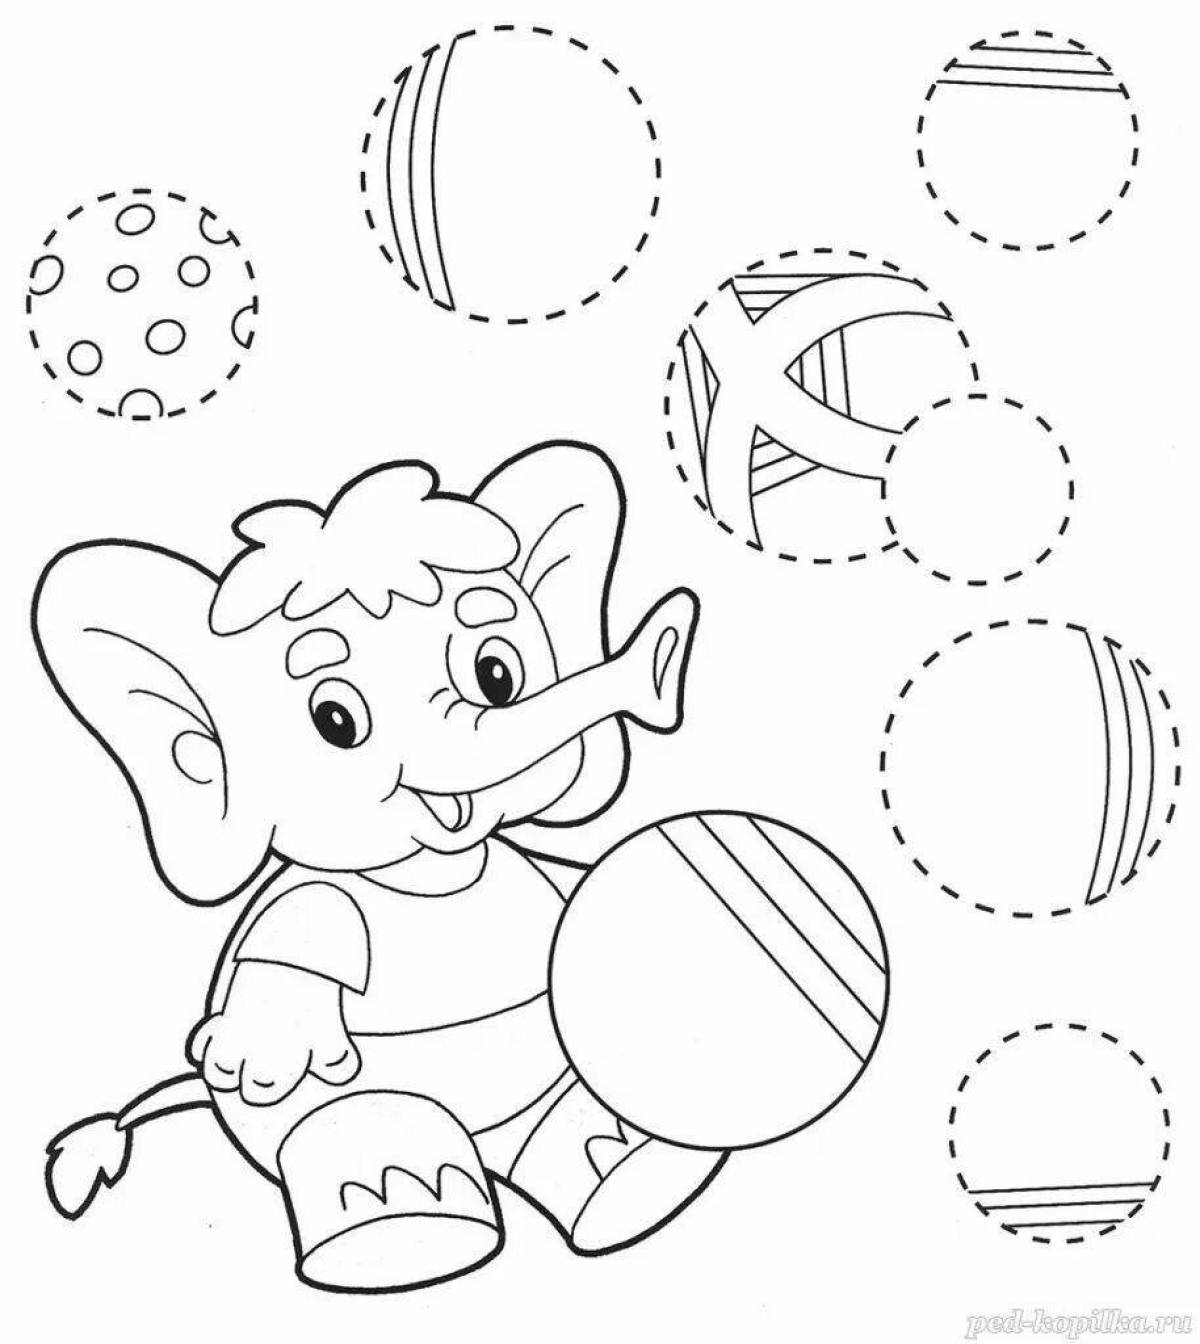 Interactive coloring book for learning and development of children 4-5 years old